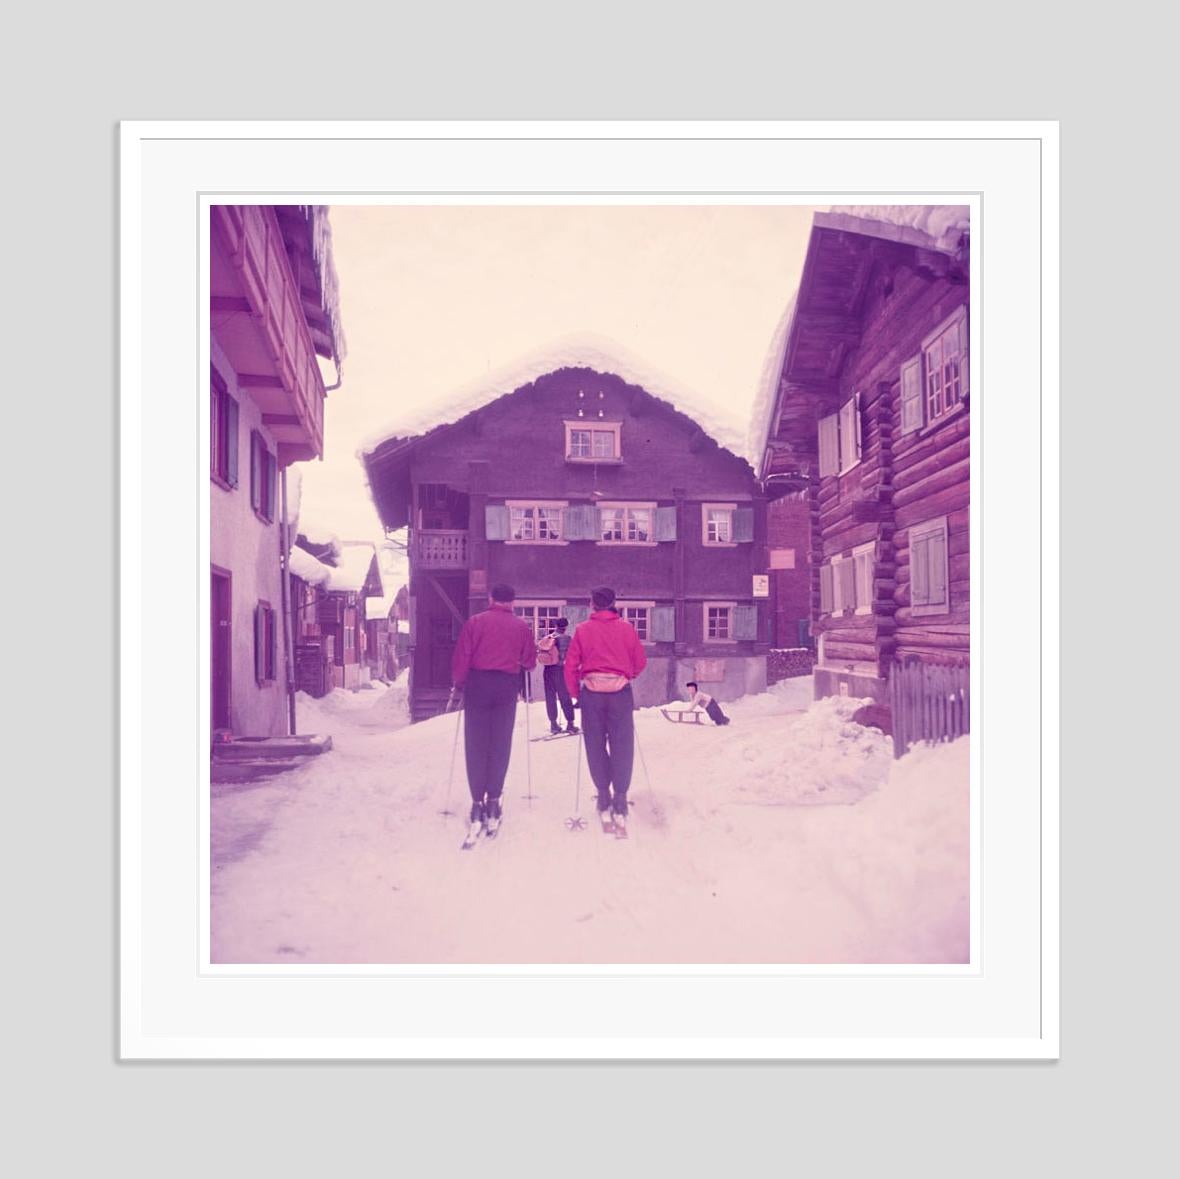 Setting Out

1951

Two skiers set out through snow covered streets, Klosters, Switzerland, 1951

by Toni Frissell

30 x 30